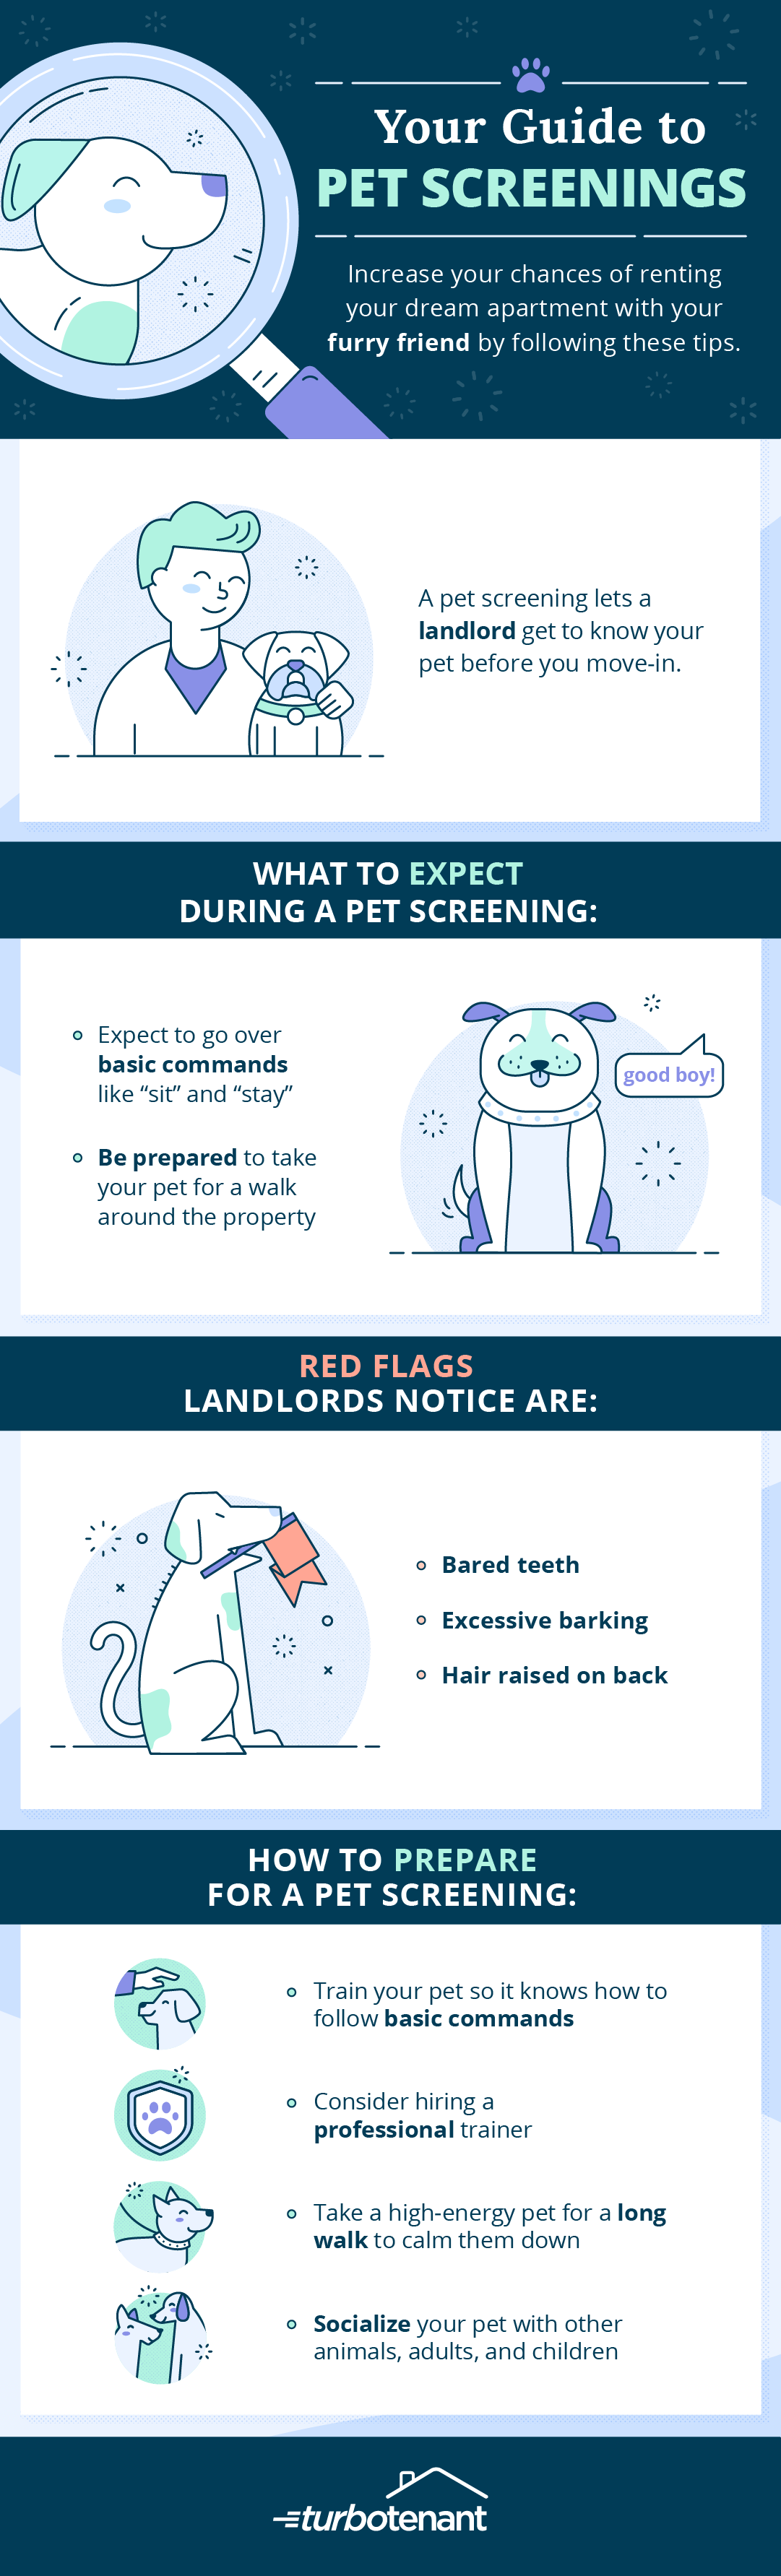 What questions does petscreening ask?